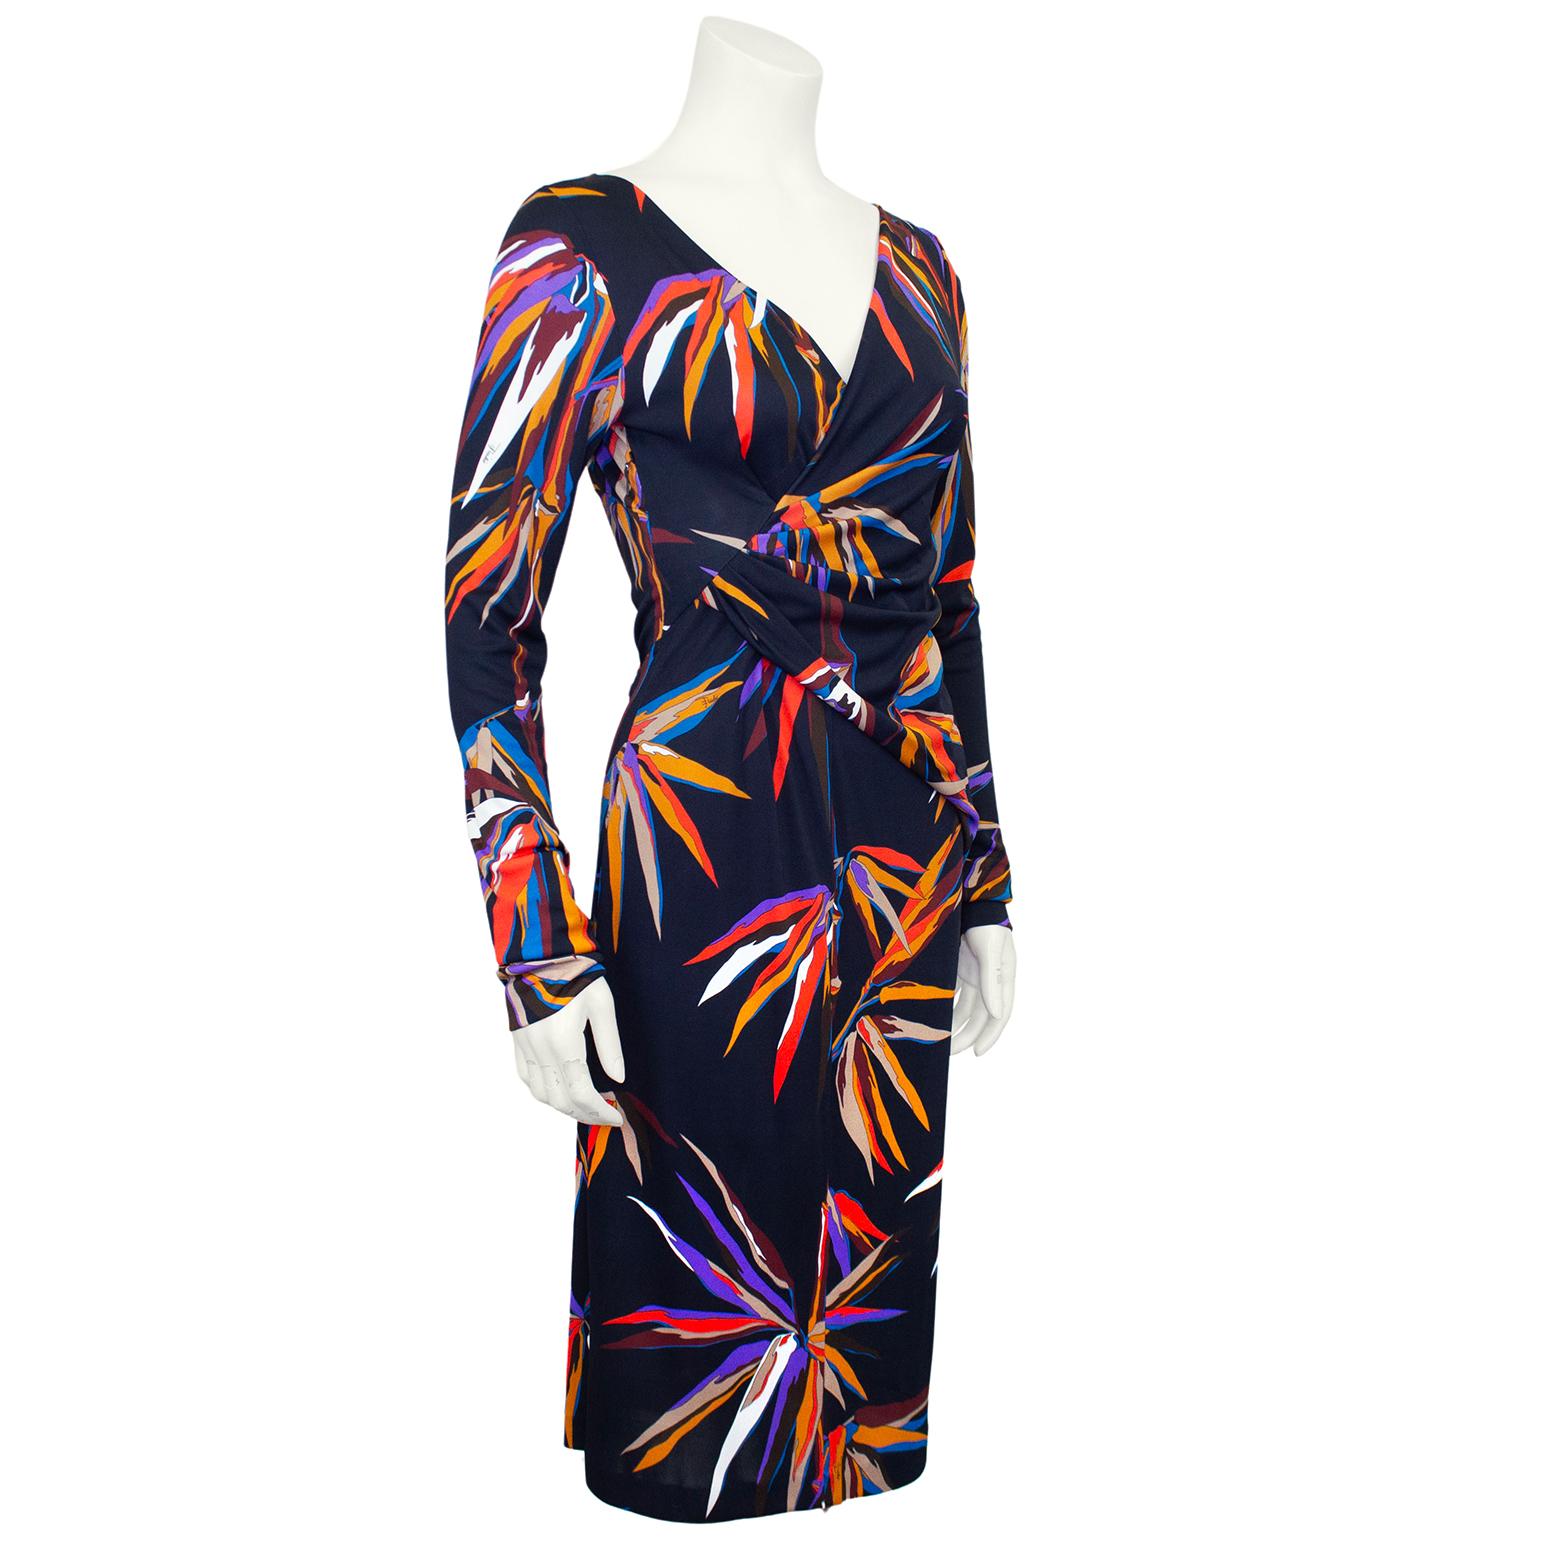 A departure from the abstract geometric prints, this 2000s Emilio Pucci dress is black and a large all over multicolour Birds of Paradise print. Crafted from a viscose and silk blend, this piece skims the body and is quite sexy. Long sleeve with a v